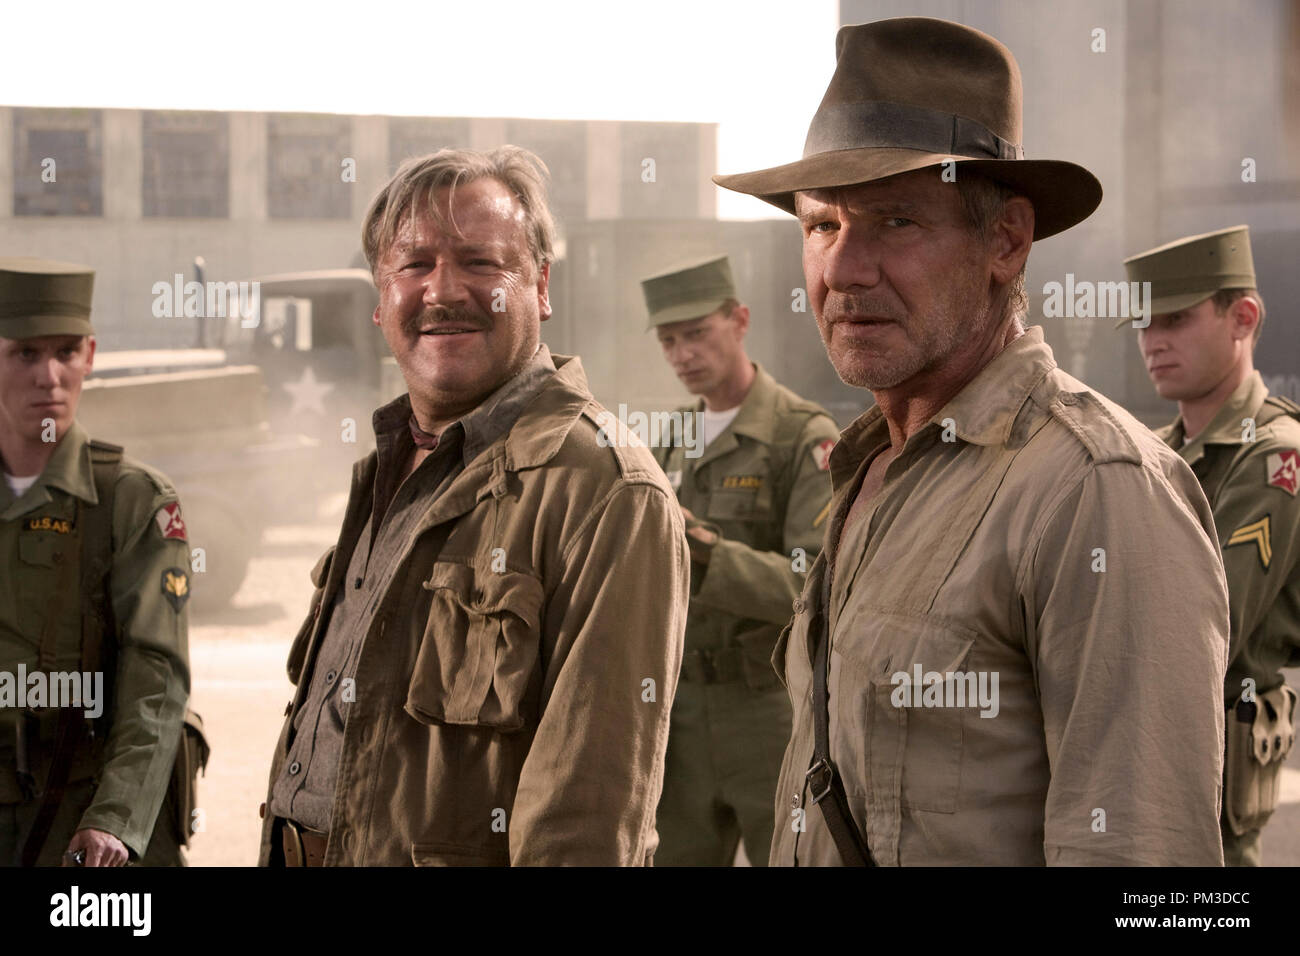 Indiana Jones and the Kingdom of the Crystal Skull Ray Winstone, Harrison Ford © 2008 Lucasfilm Ltd. Photo by David James Stock Photo